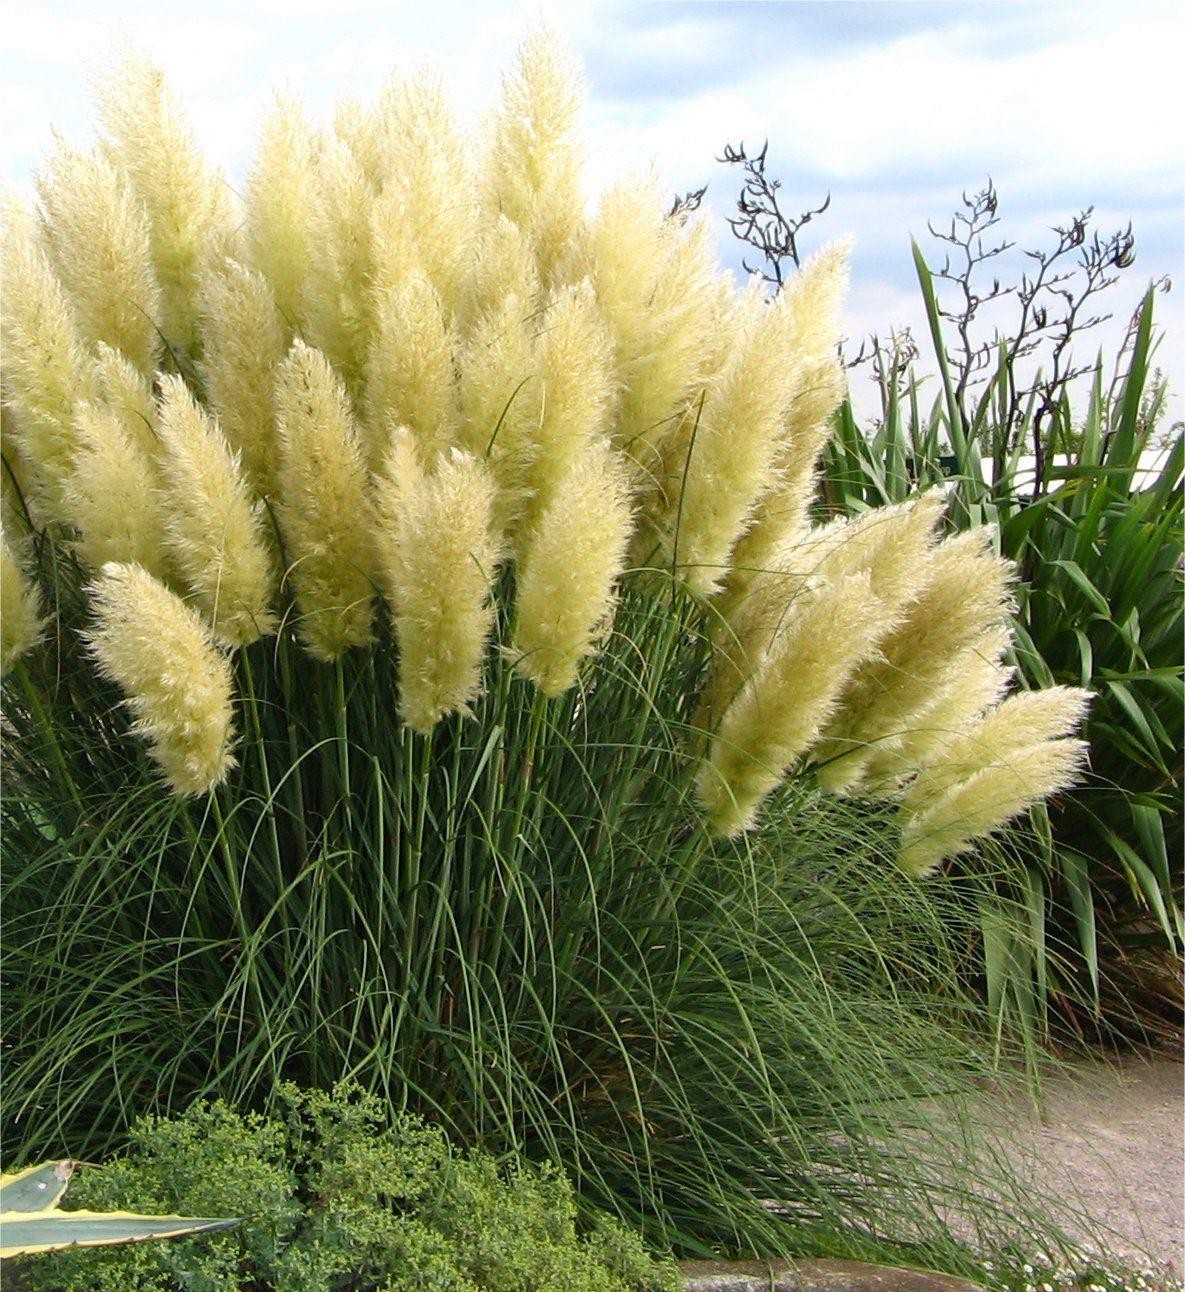 Top 93+ Images show me a picture of pampas grass Latest